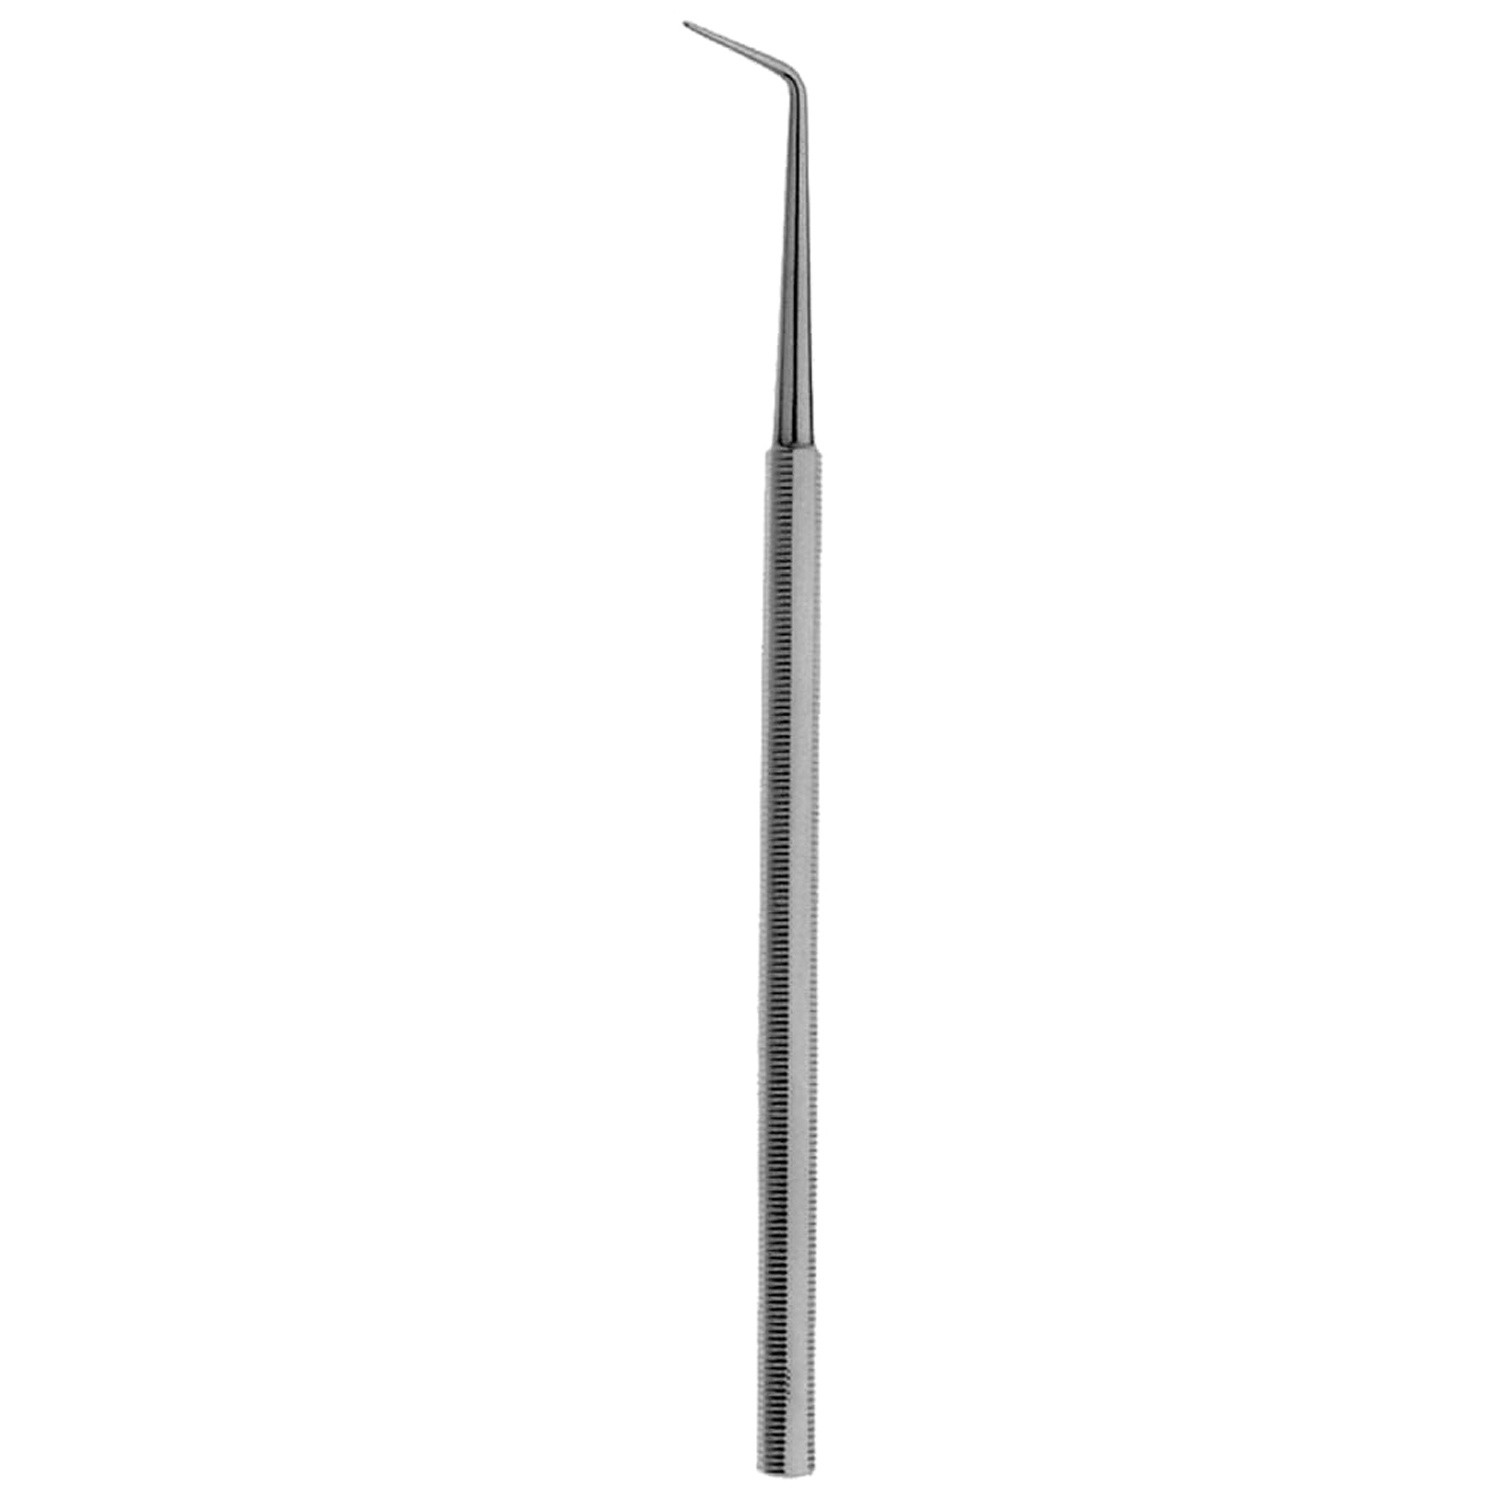 Bunnell Dissecting Probe, Angular Tip, 5 1/2" (14.0 Cm)